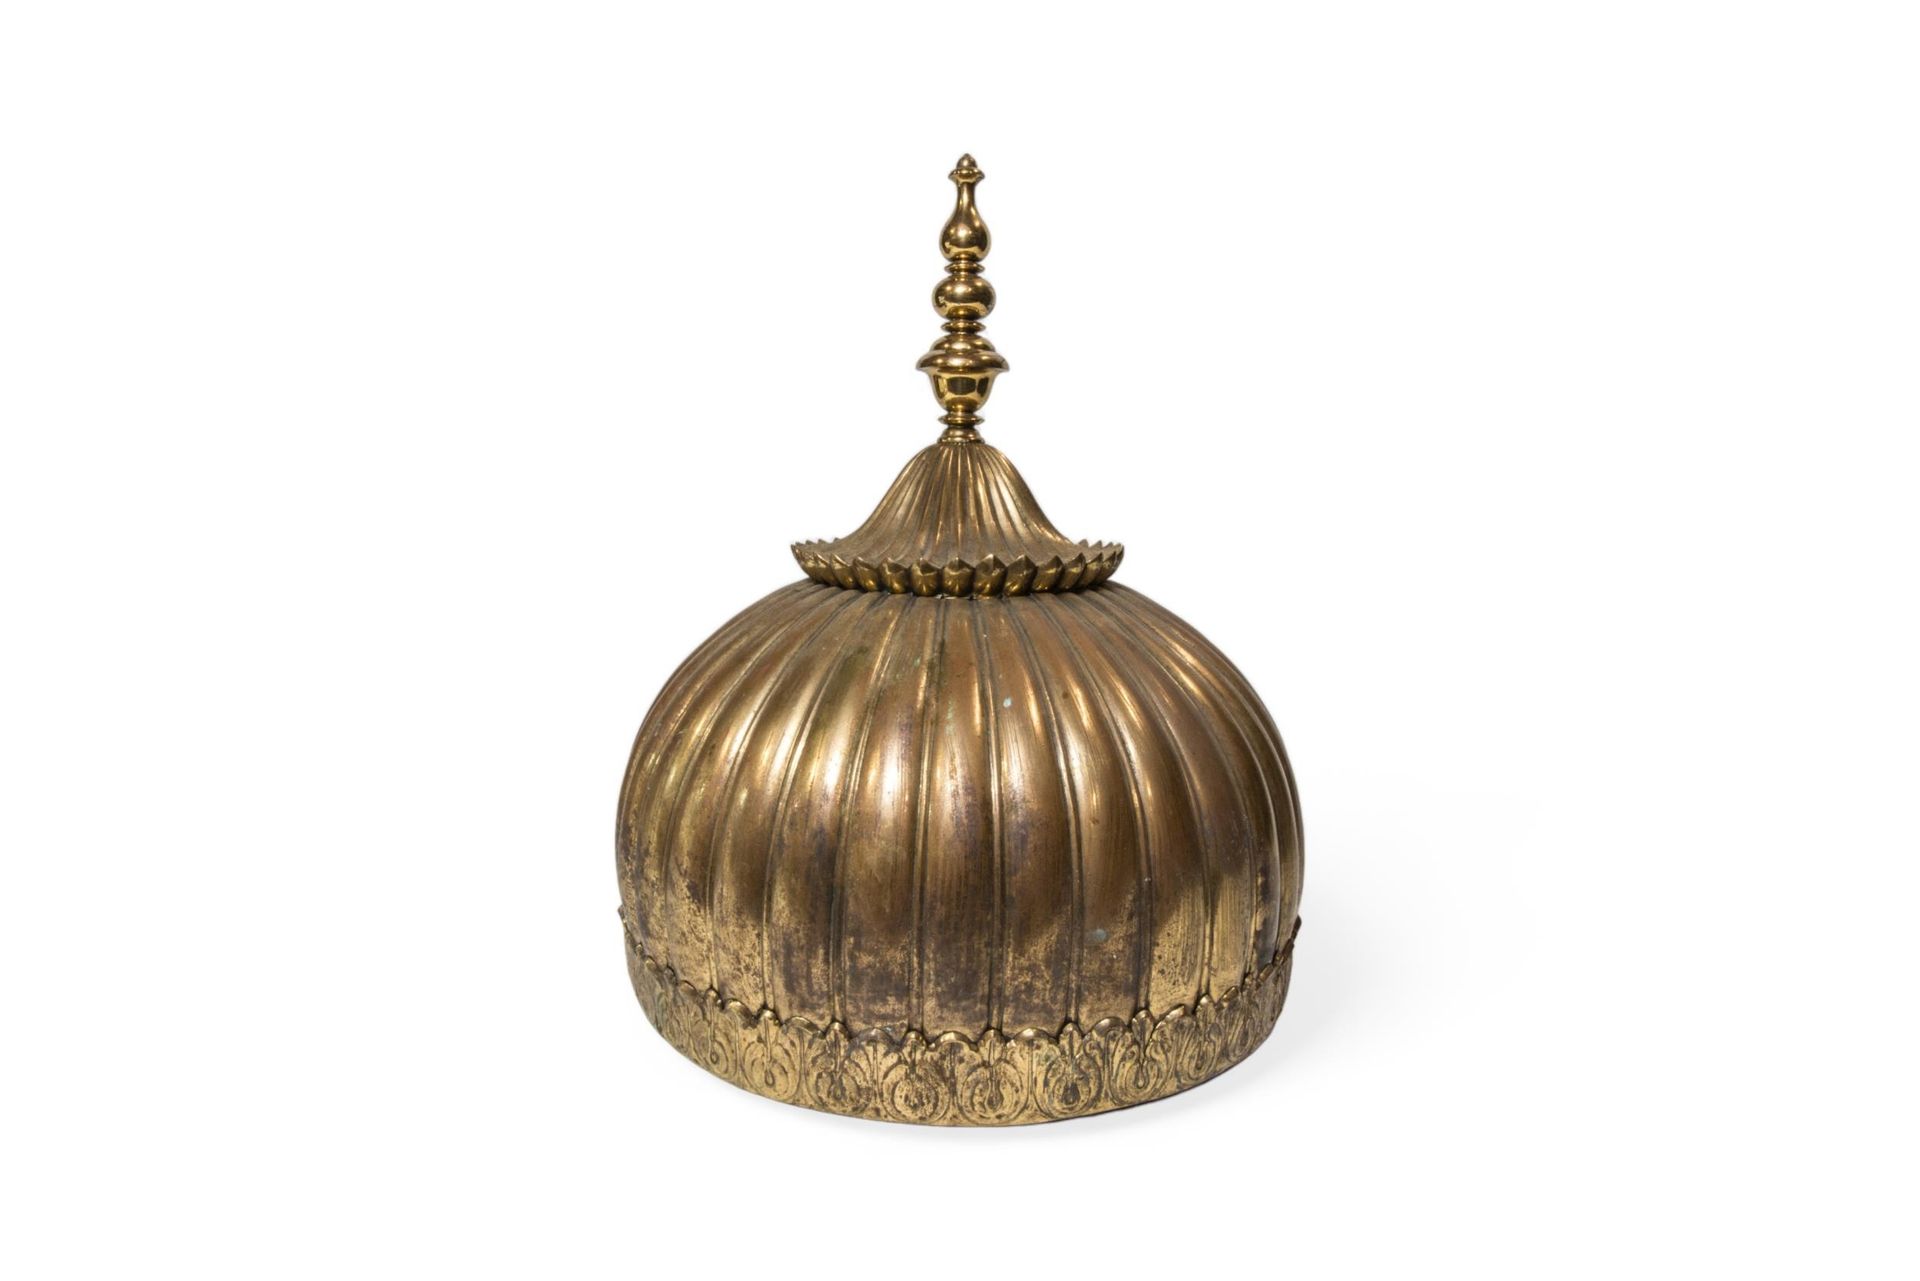 Null A BRASS MUGHAL STYLE DOME, POSSIBLY A BED CANOPY, 20TH CENTURY. 47cms high